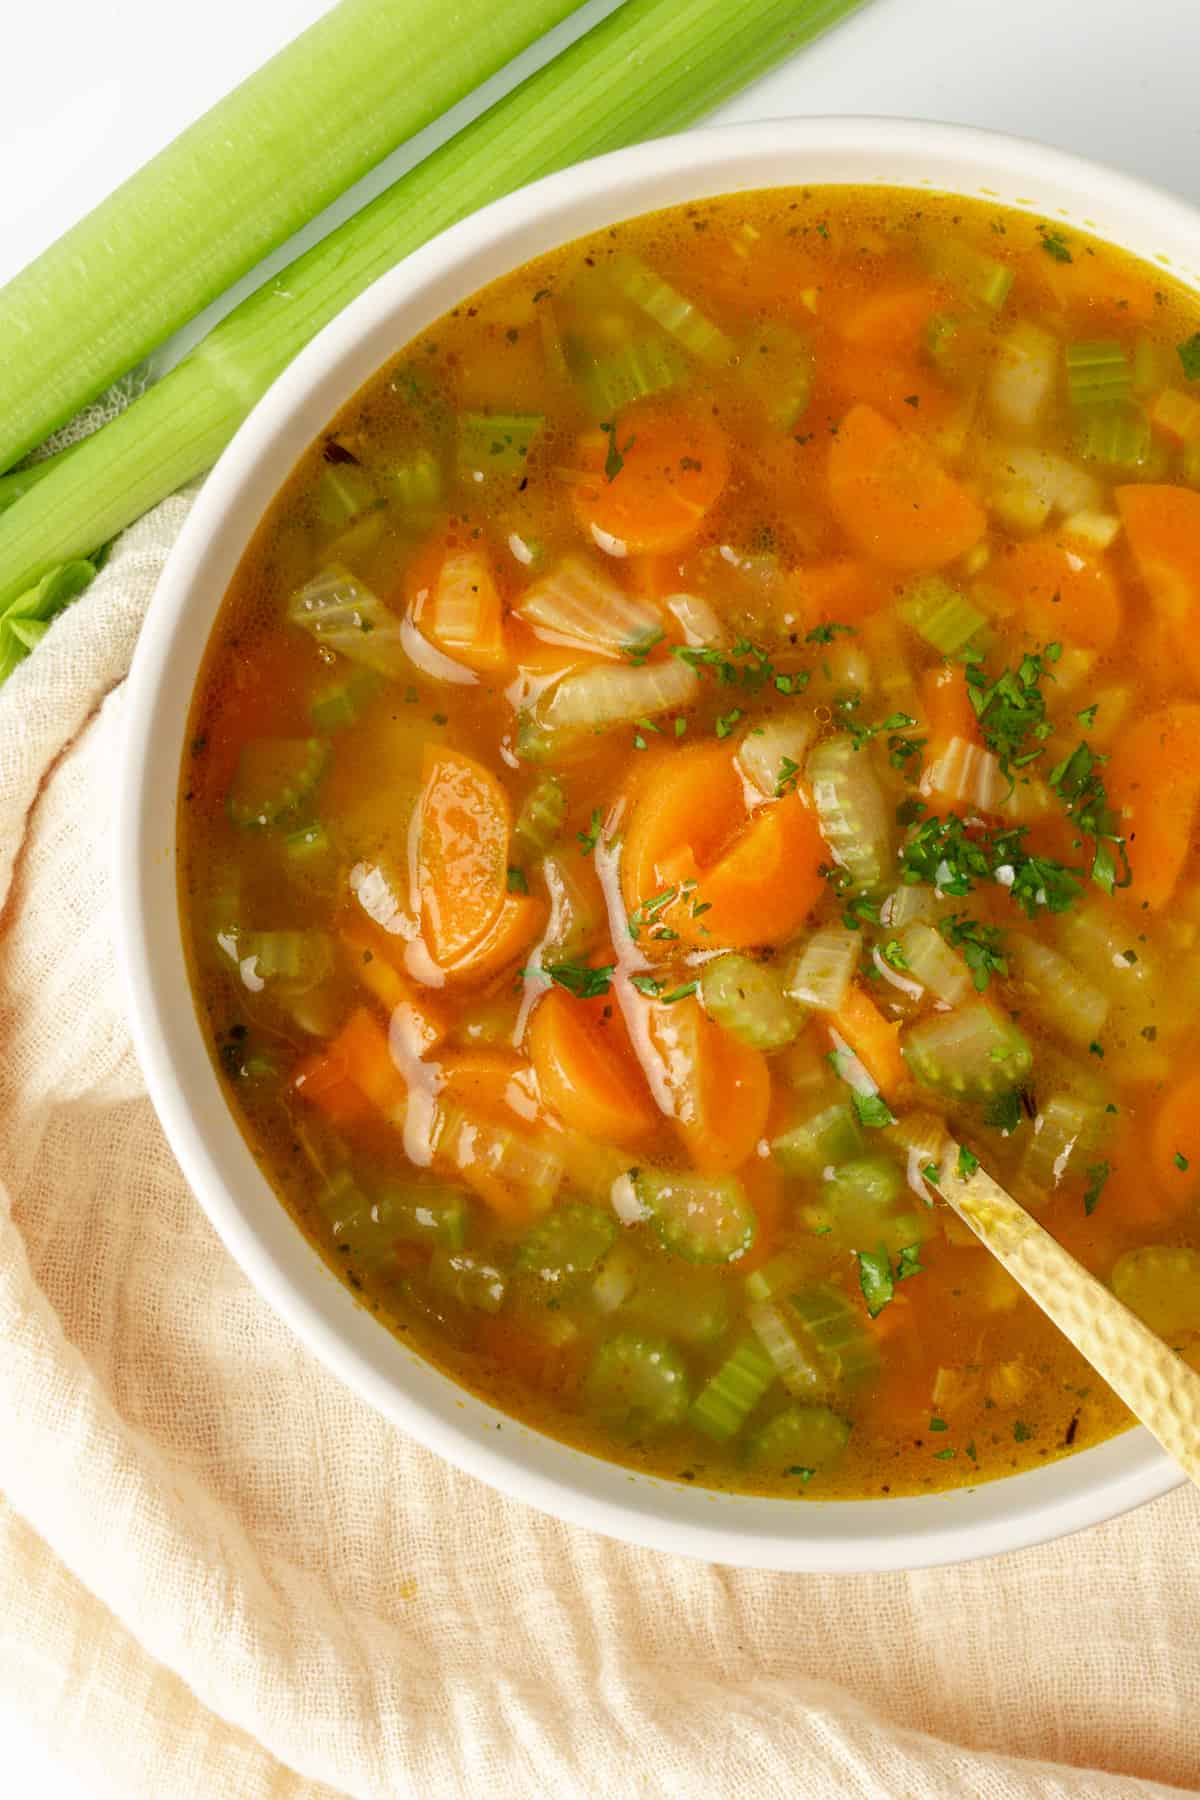 A bowl of soup with pieces of carrots and celery.